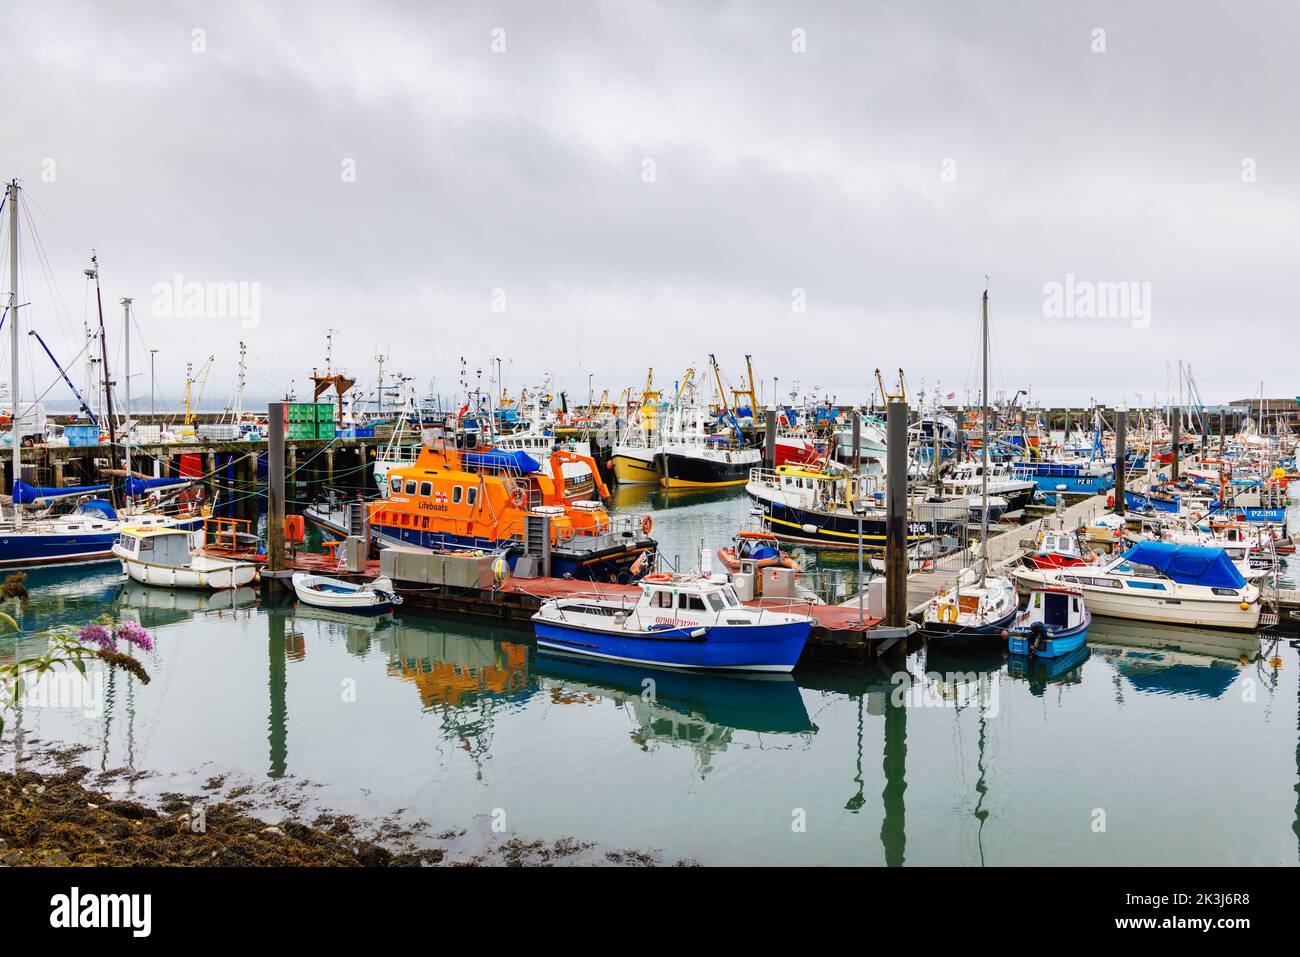 Fishing boats moored in the harbour at Newlyn, a small commercial fishing village in the West Country, on the south coast of west Cornwall, England Stock Photo